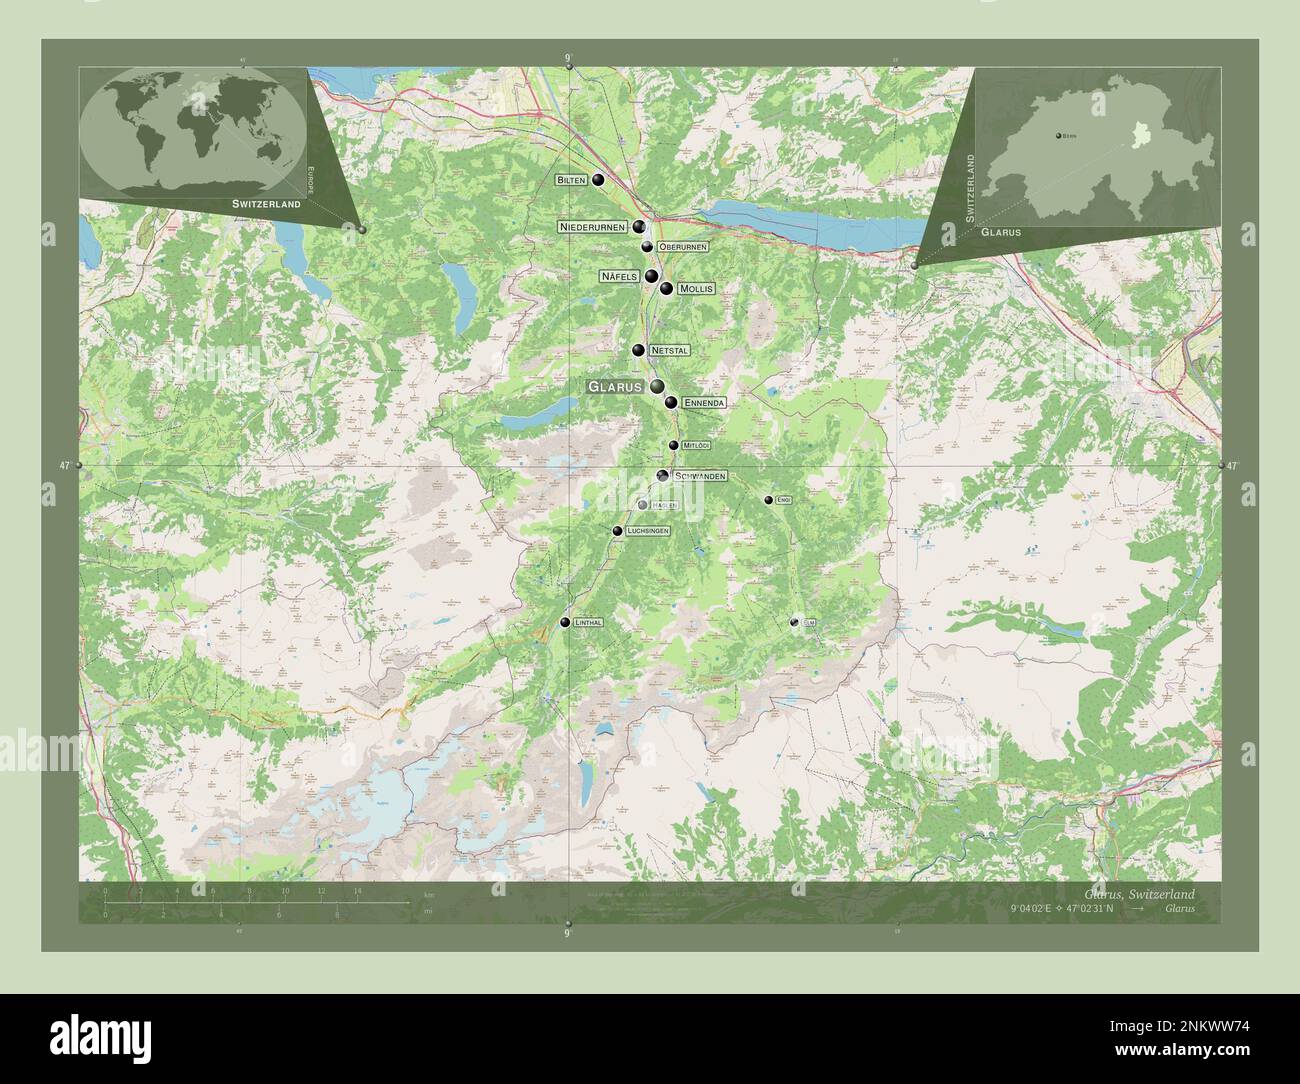 Glarus, canton of Switzerland. Open Street Map. Locations and names of major cities of the region. Corner auxiliary location maps Stock Photo